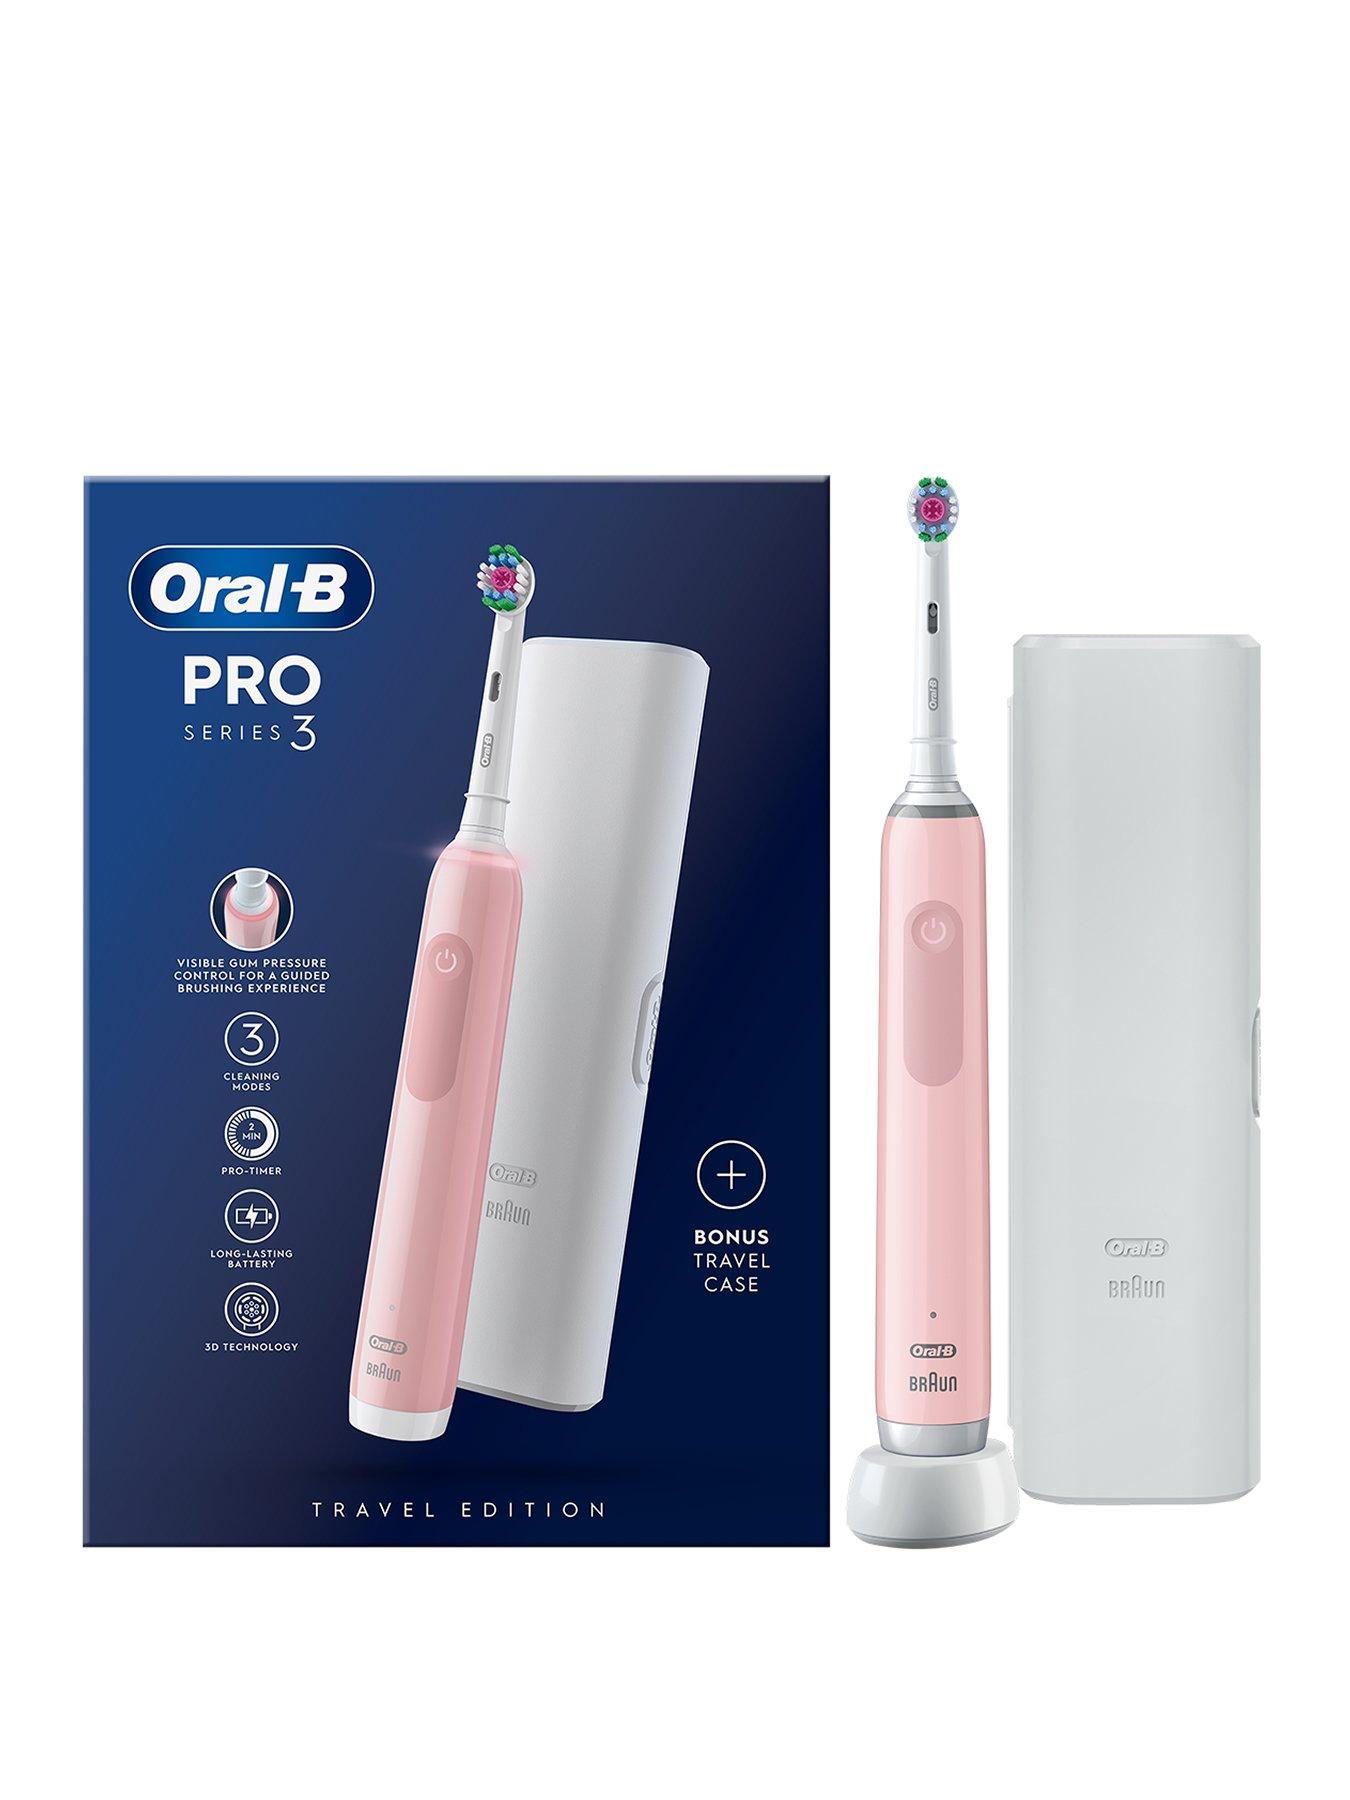 Oral-B iO Series 9 Electric Toothbrush with 4 Brush Heads, Rose Quartz, for  Adults and Children 3+